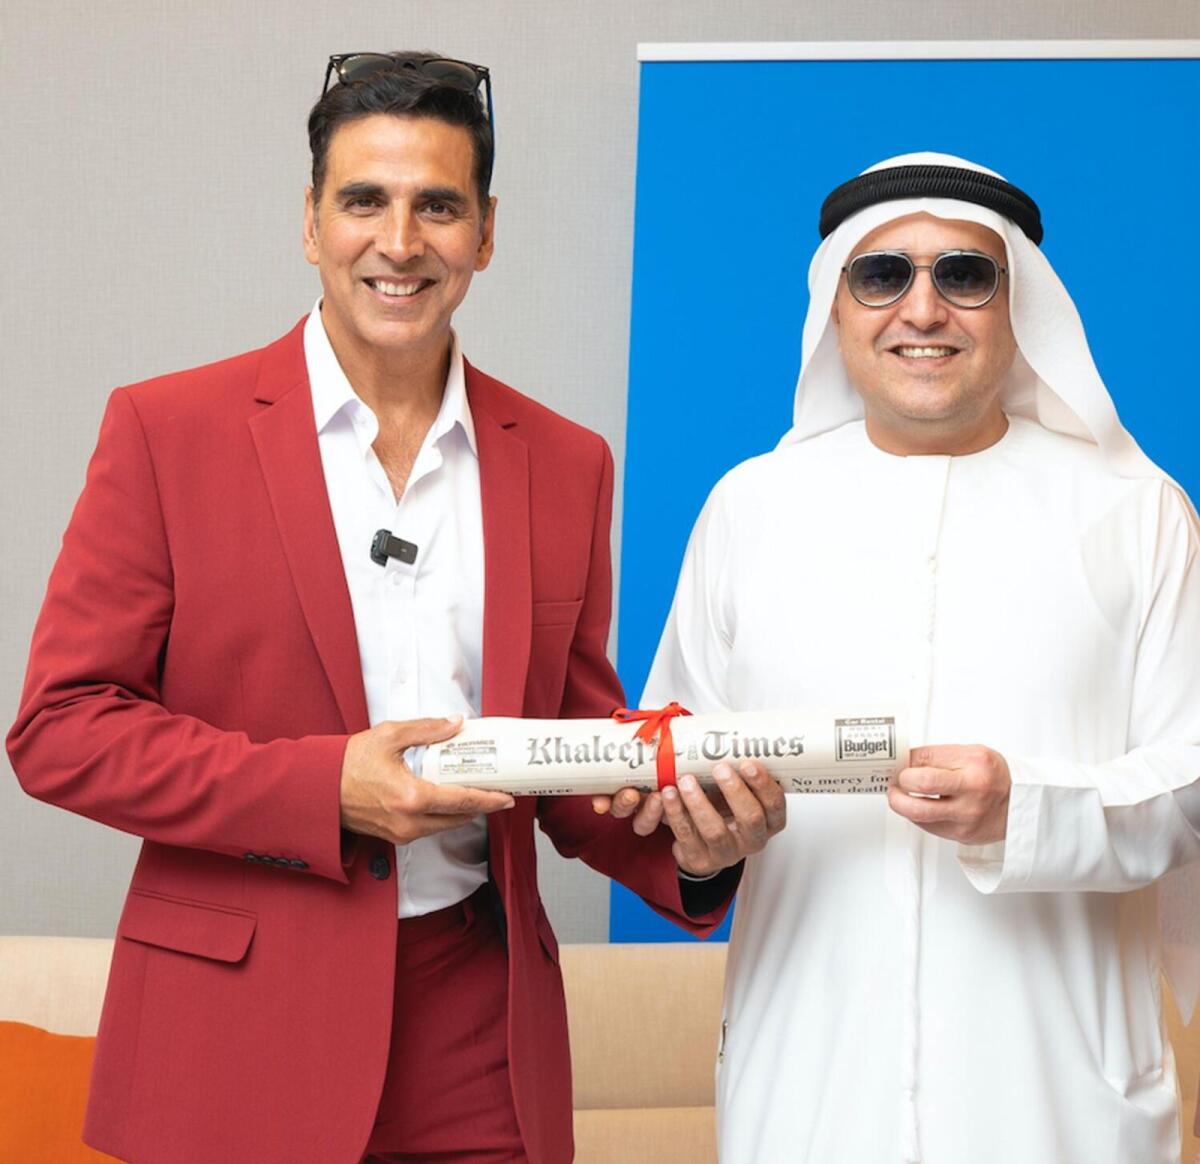 Suhail Galadari, Co-Chairman of Galadari Brothers, presents a copy of the first edition of Khaleej Times to Bollywood star Akshay Kumar during his visit to the Galadari Brothers HQ on Monday. Khaleej Times is the oldest English newspaper in the UAE and was founded on April 16, 1978. The first edition was launched by then Dubai Ruler Sheikh Rashid. Kumar is in town to promote his family drama Raksha Bandhan. The film will release in the UAE on August 11. — Photo by Shihab